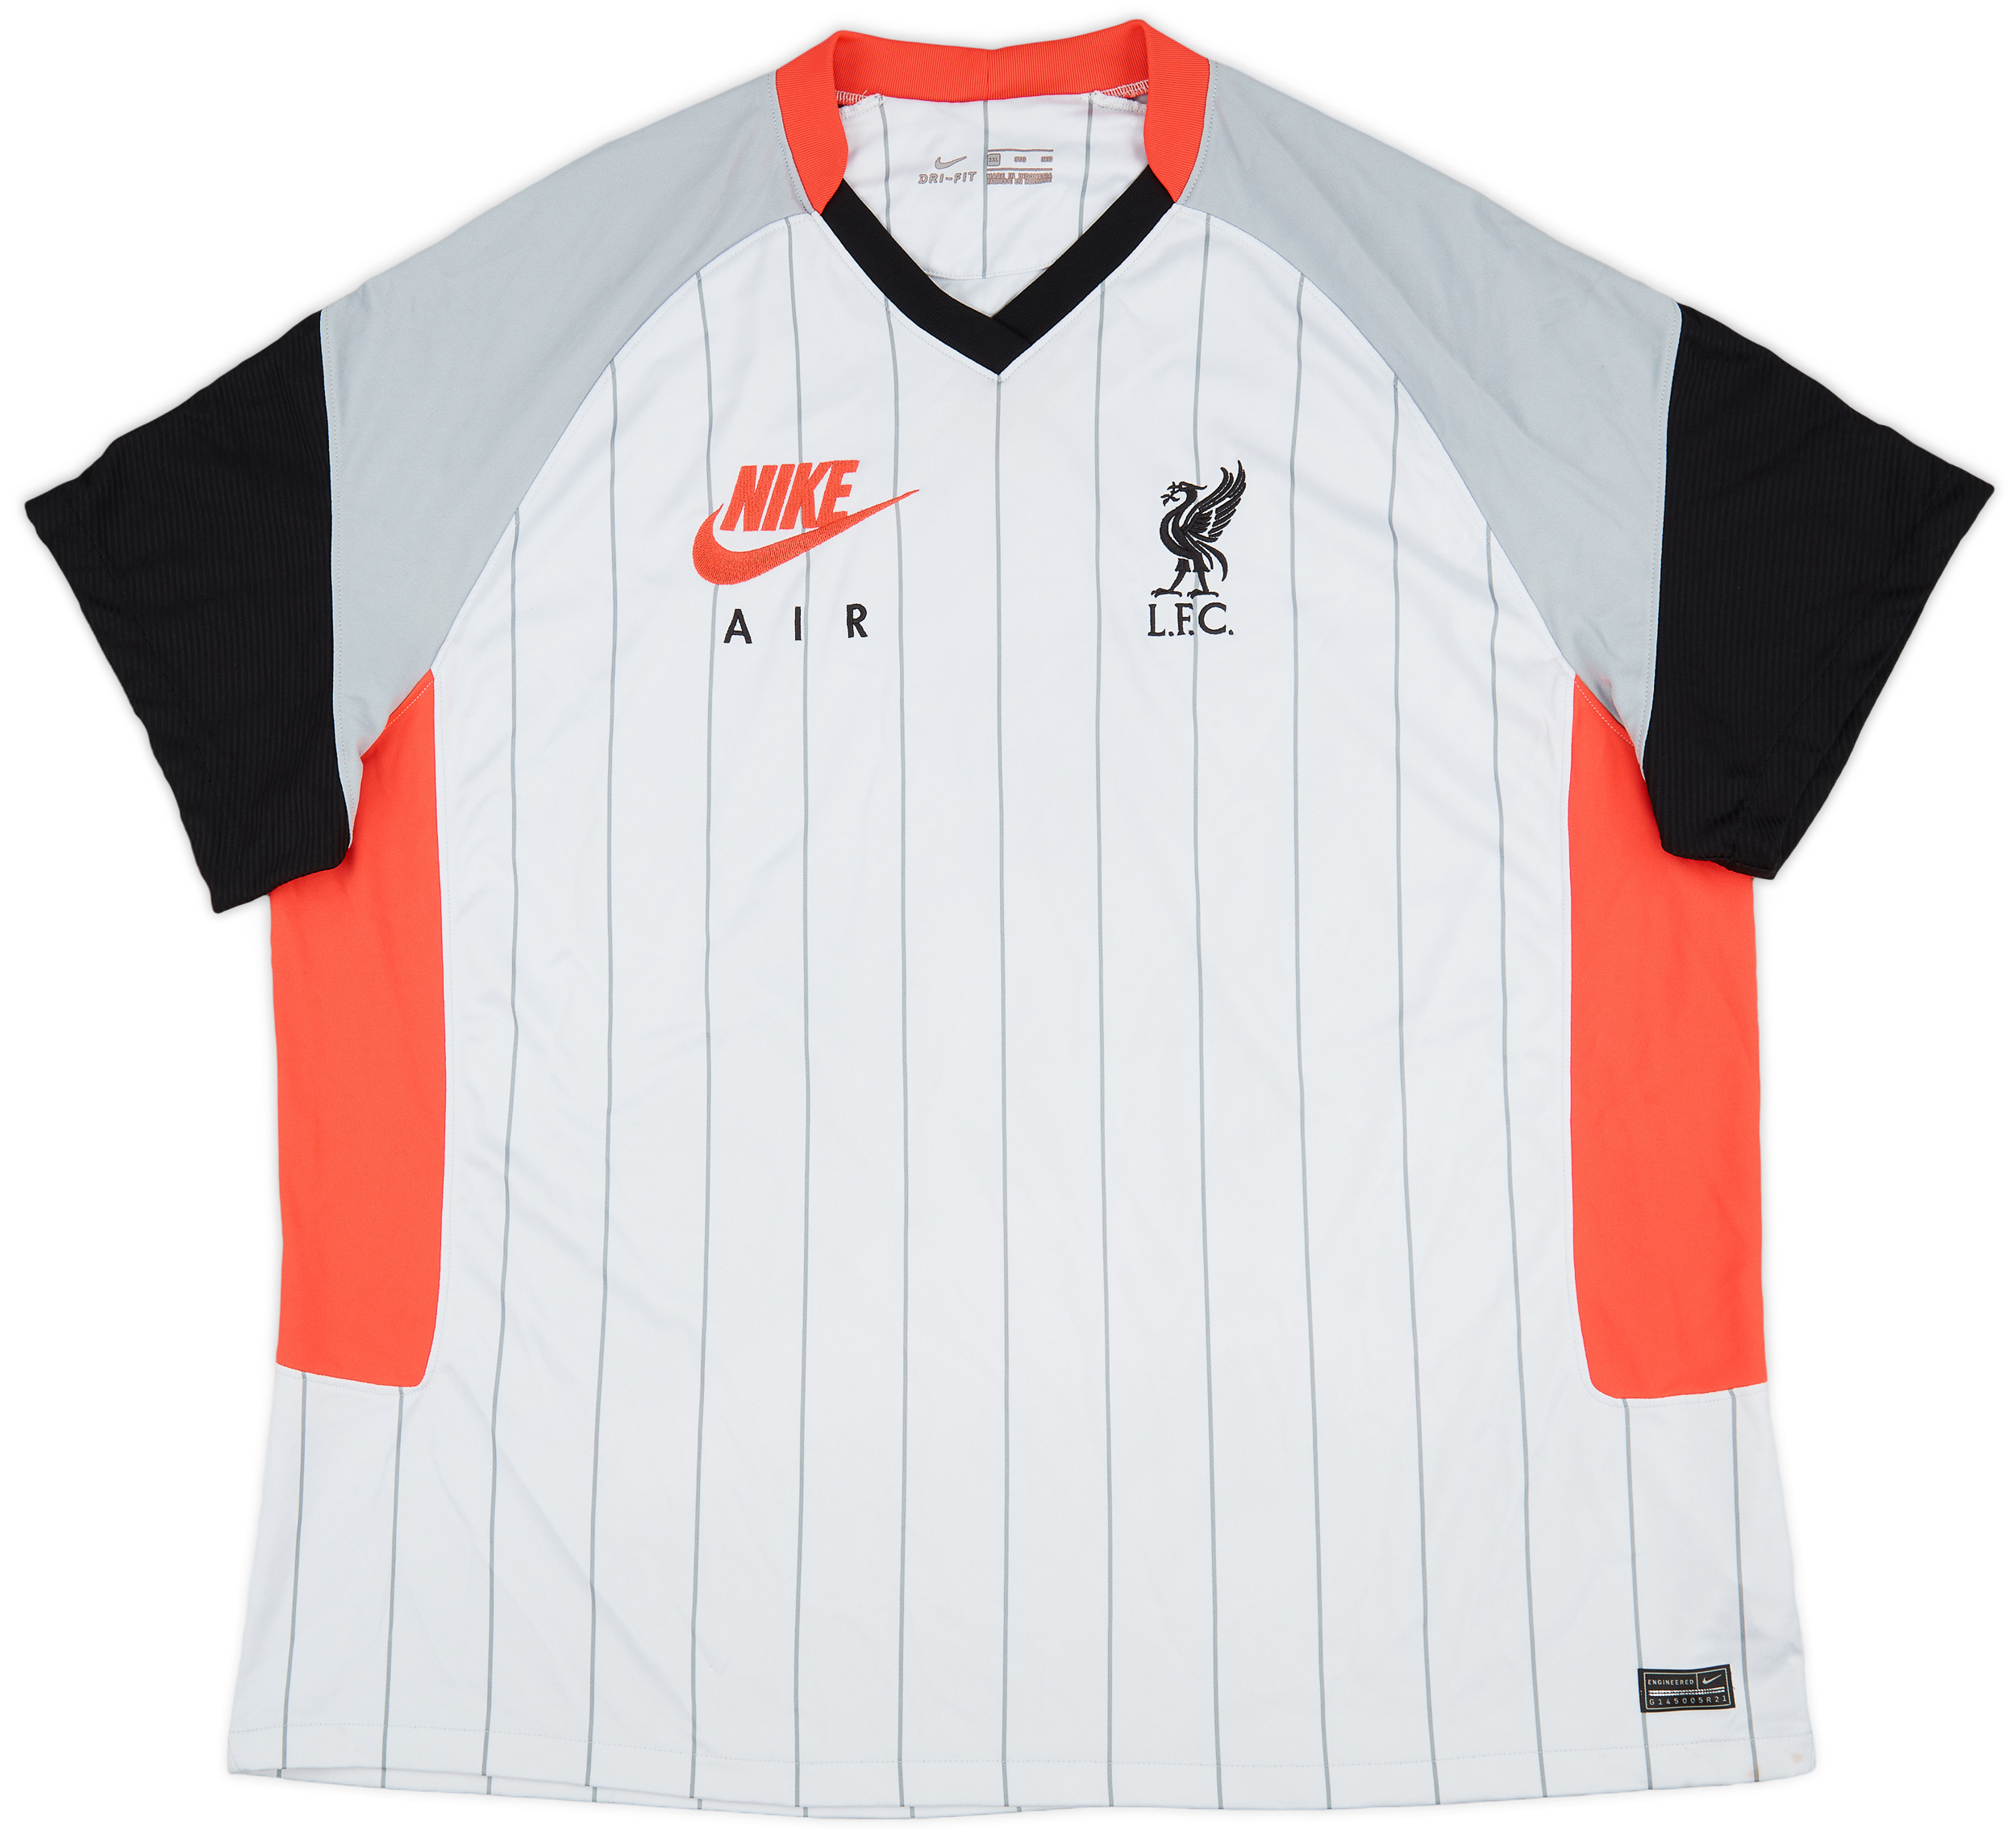 2020-21 Liverpool Nike Air Max Shirt - Excellent 8/10 - ()